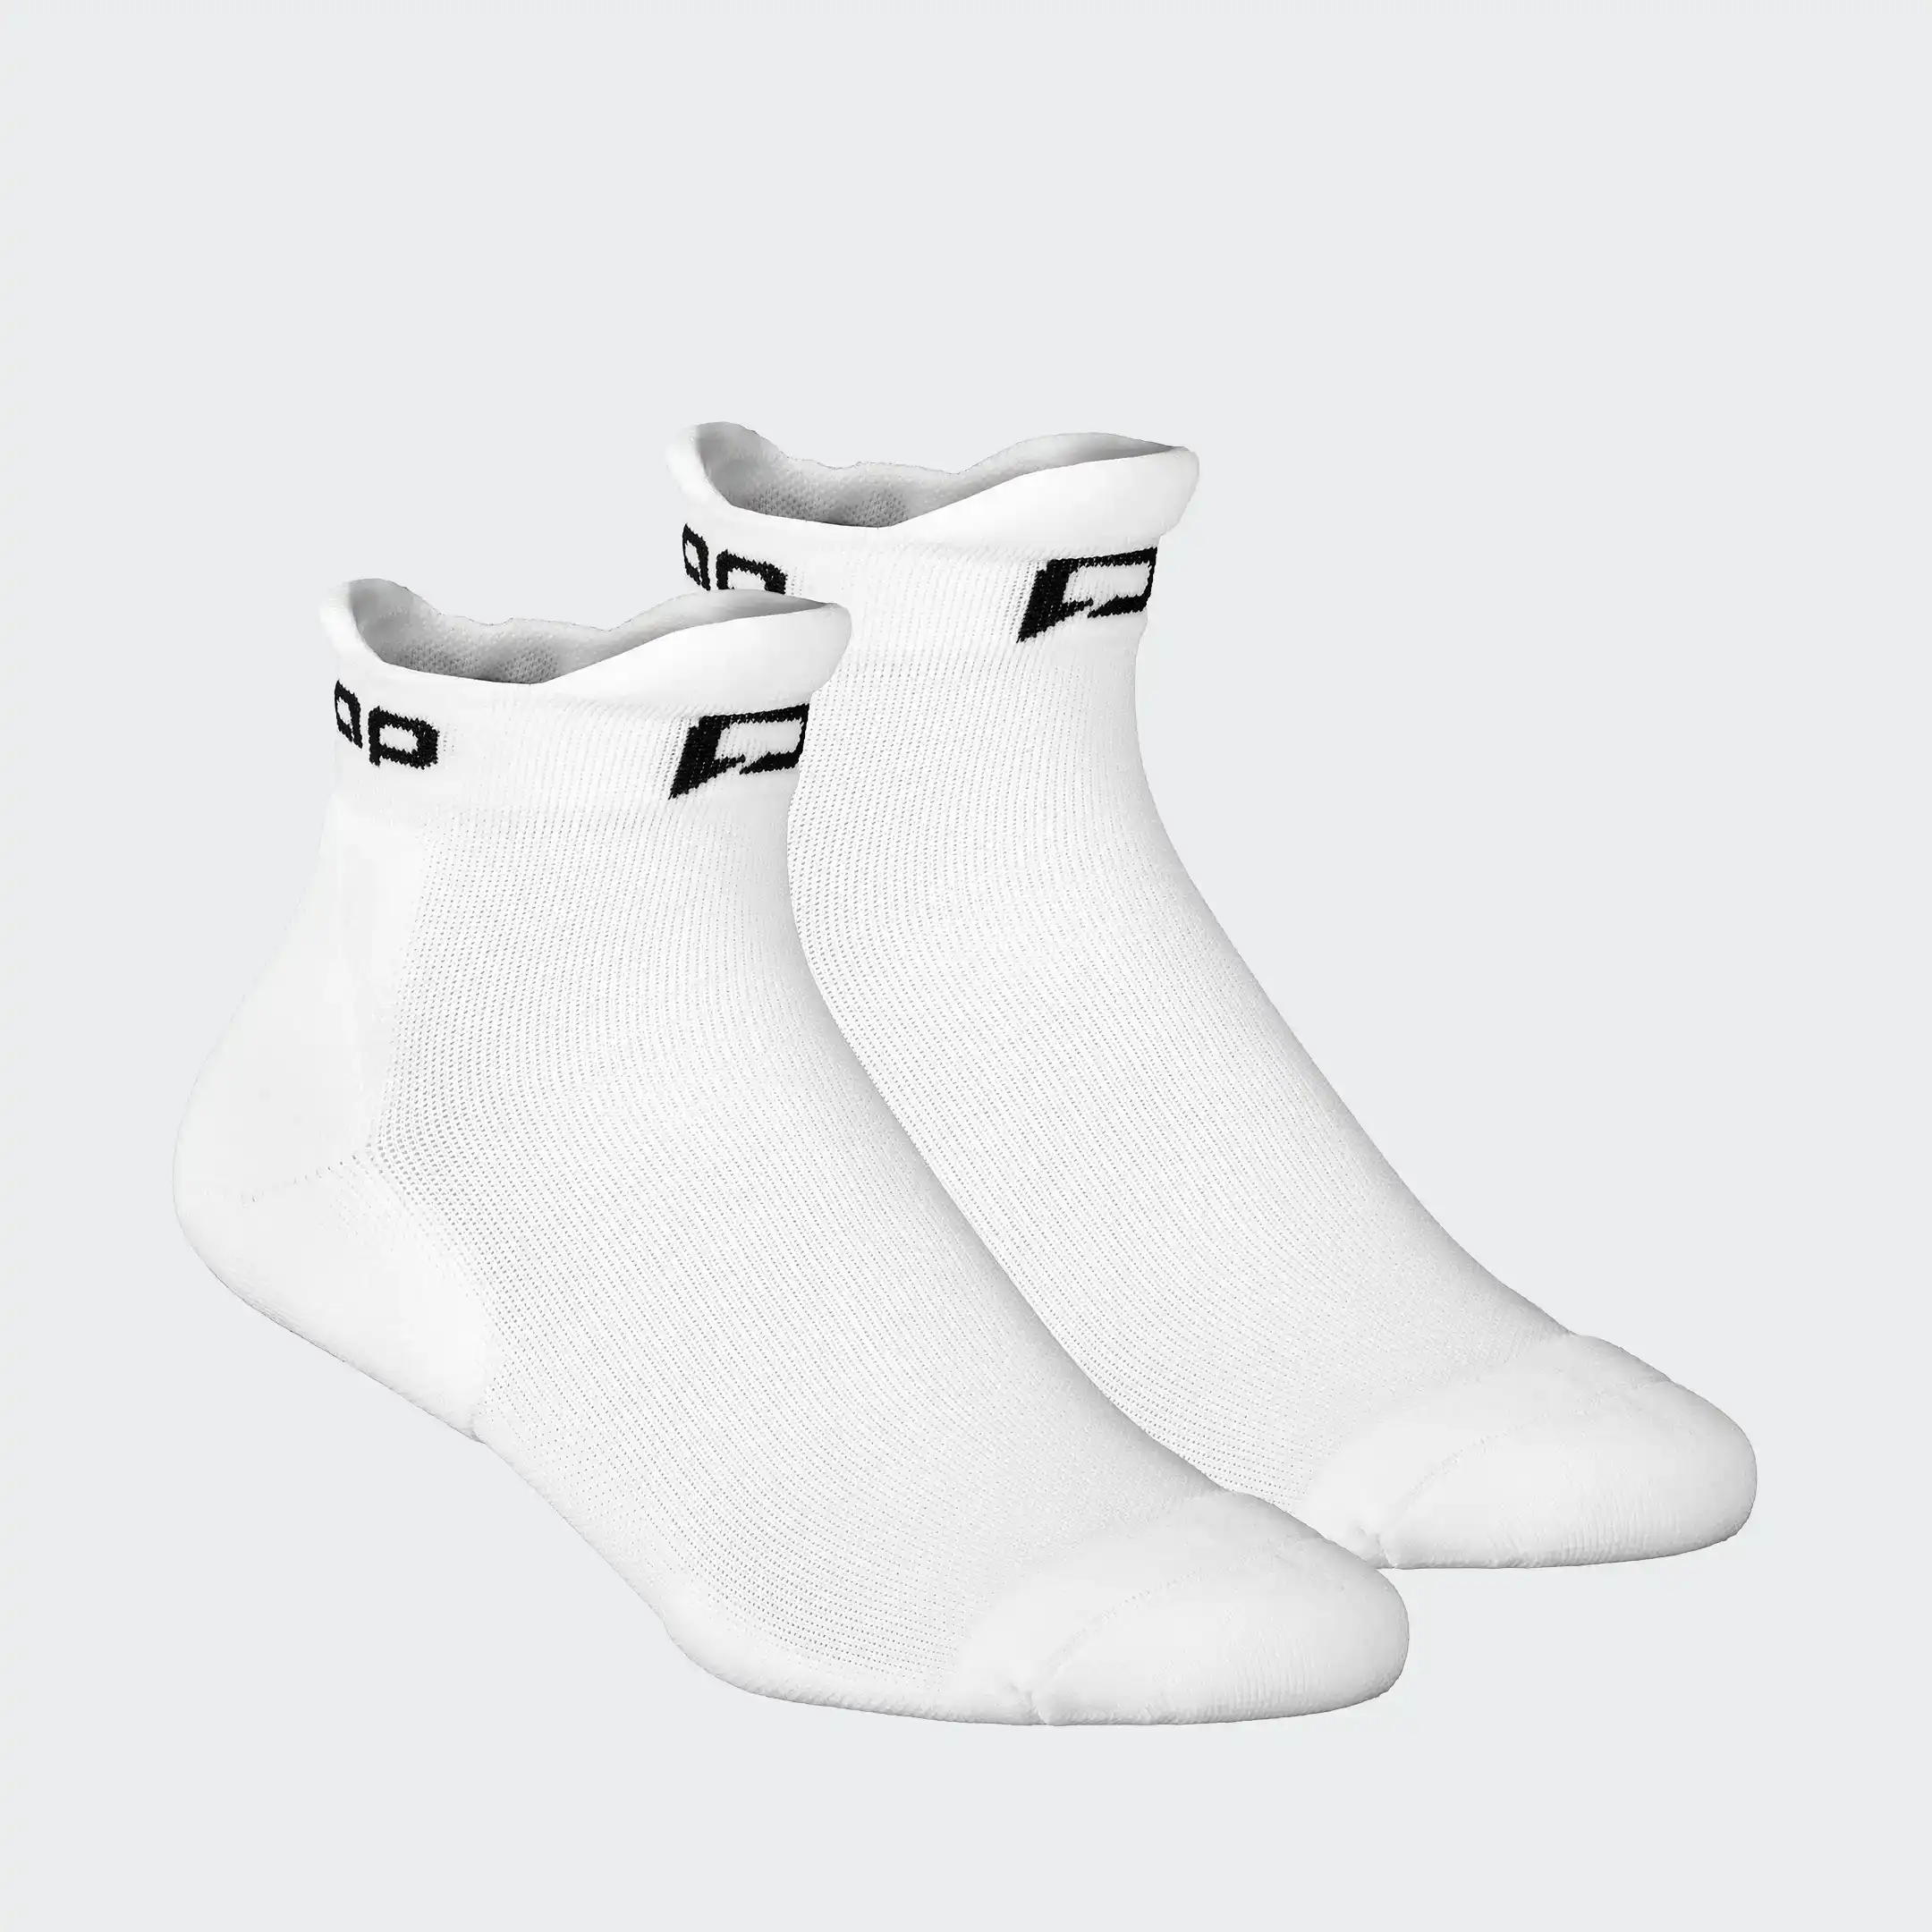 Pallap Competition Socken low, white